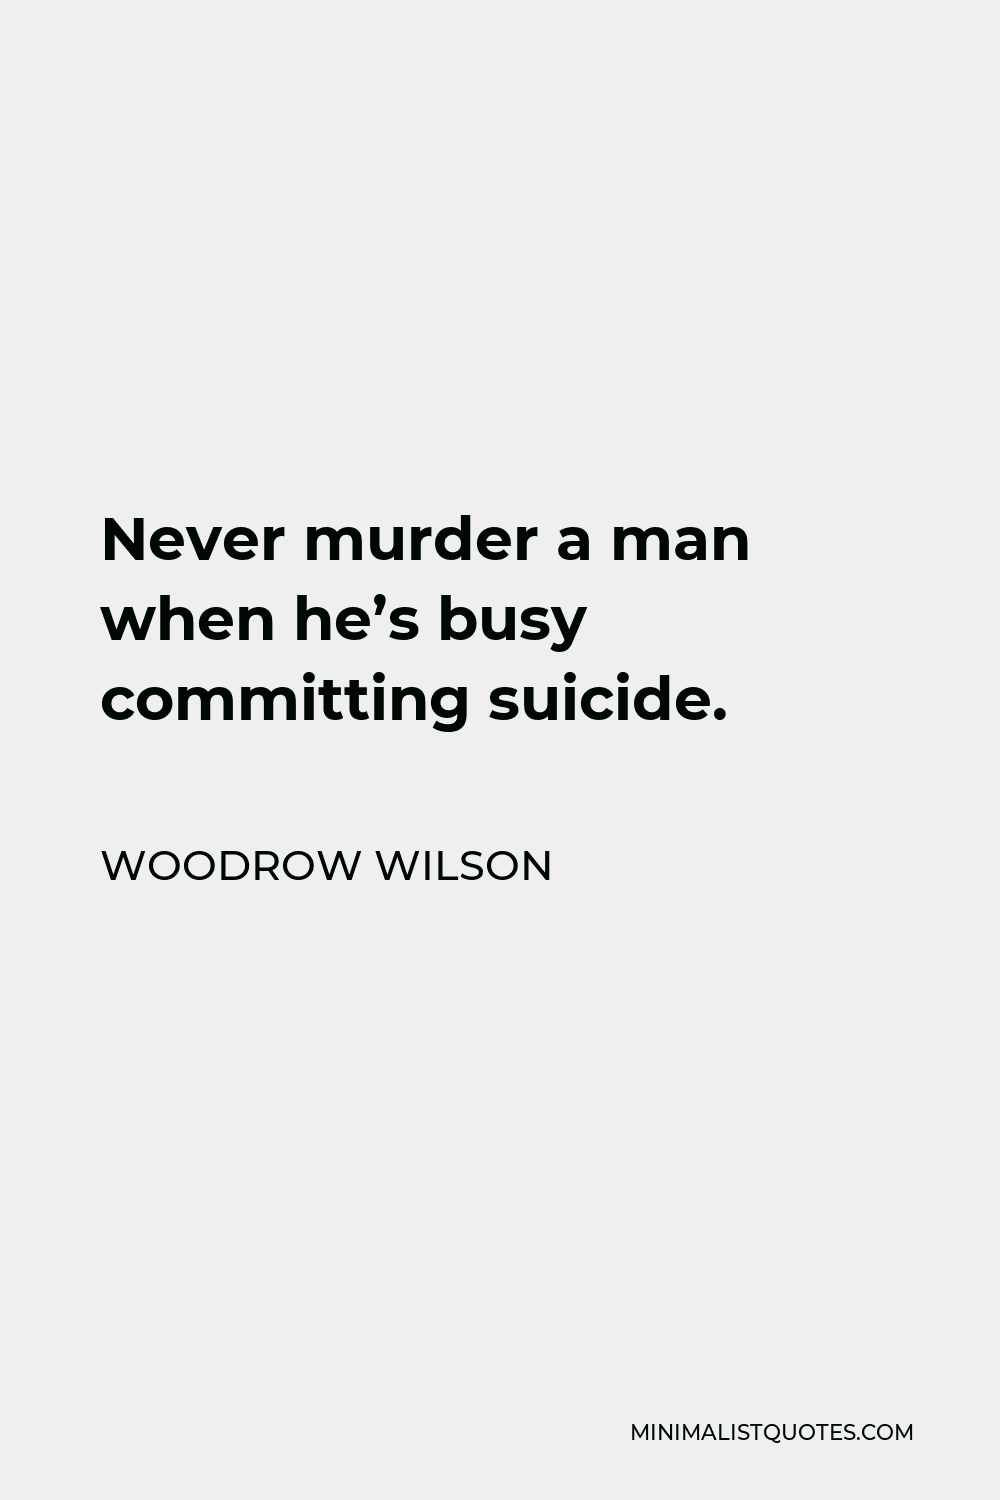 Woodrow Wilson Quote - Never murder a man when he’s busy committing suicide.